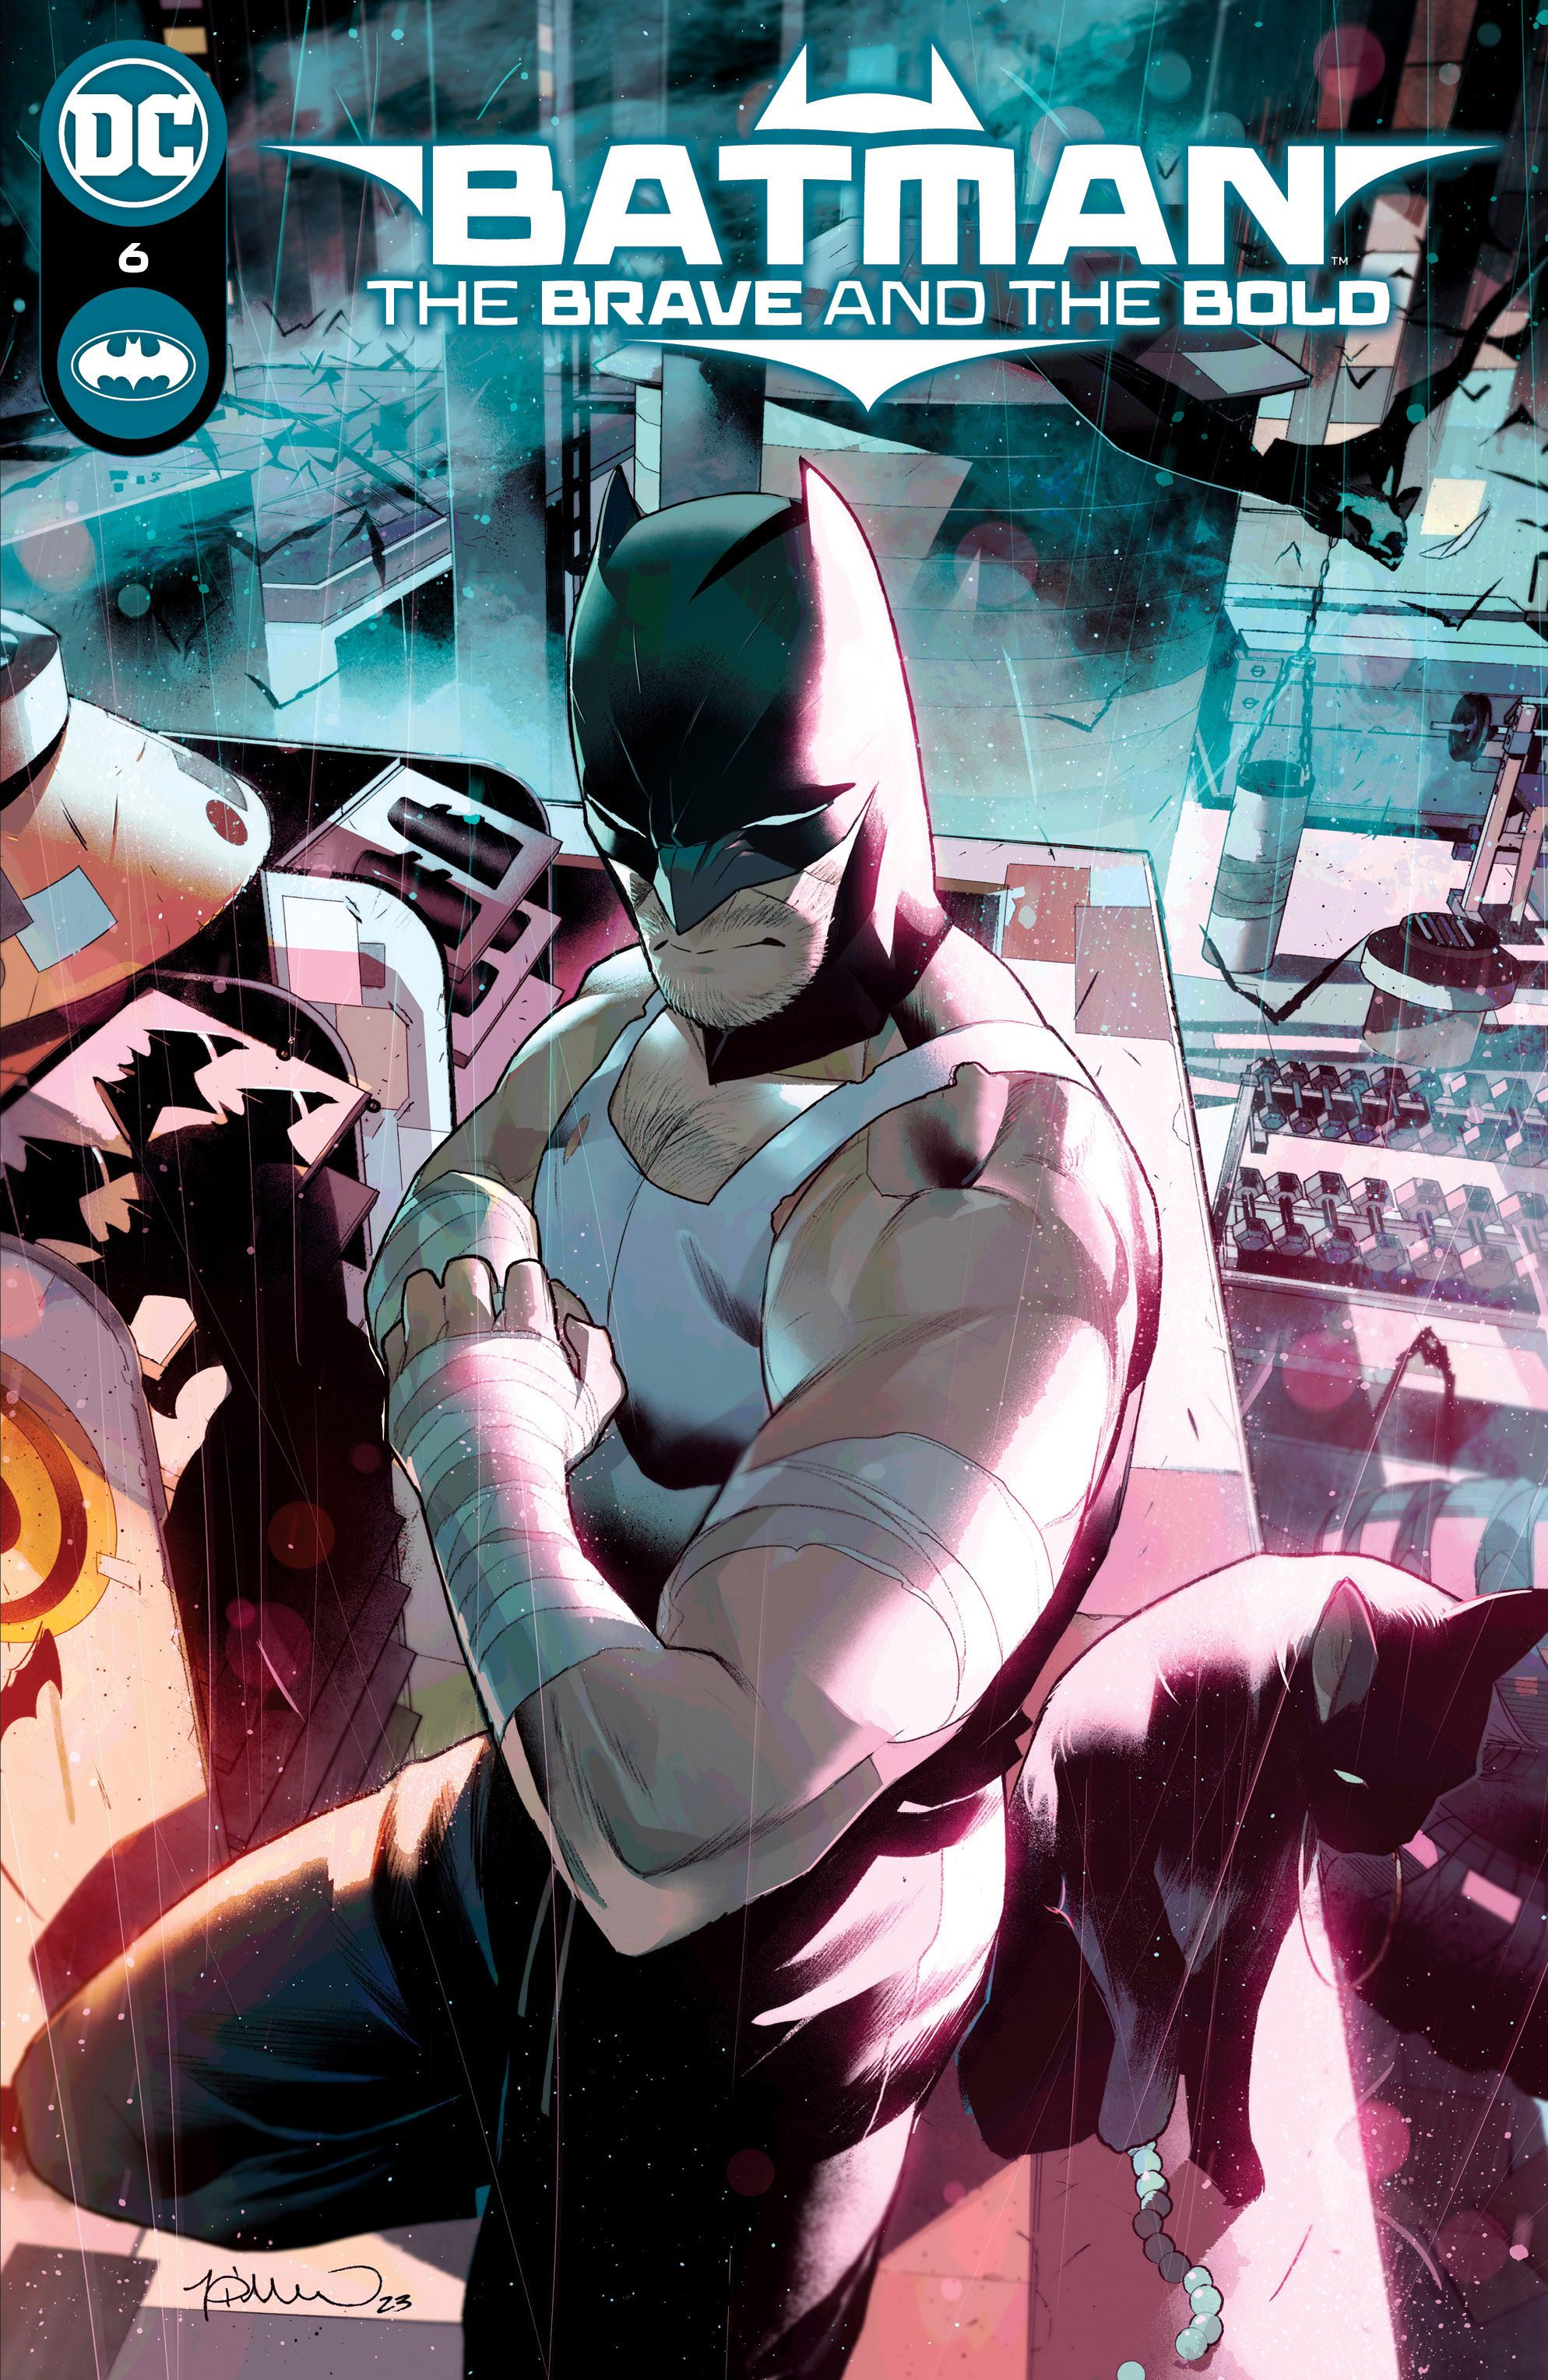 Batman: The Brave and the Bold #6 Comic